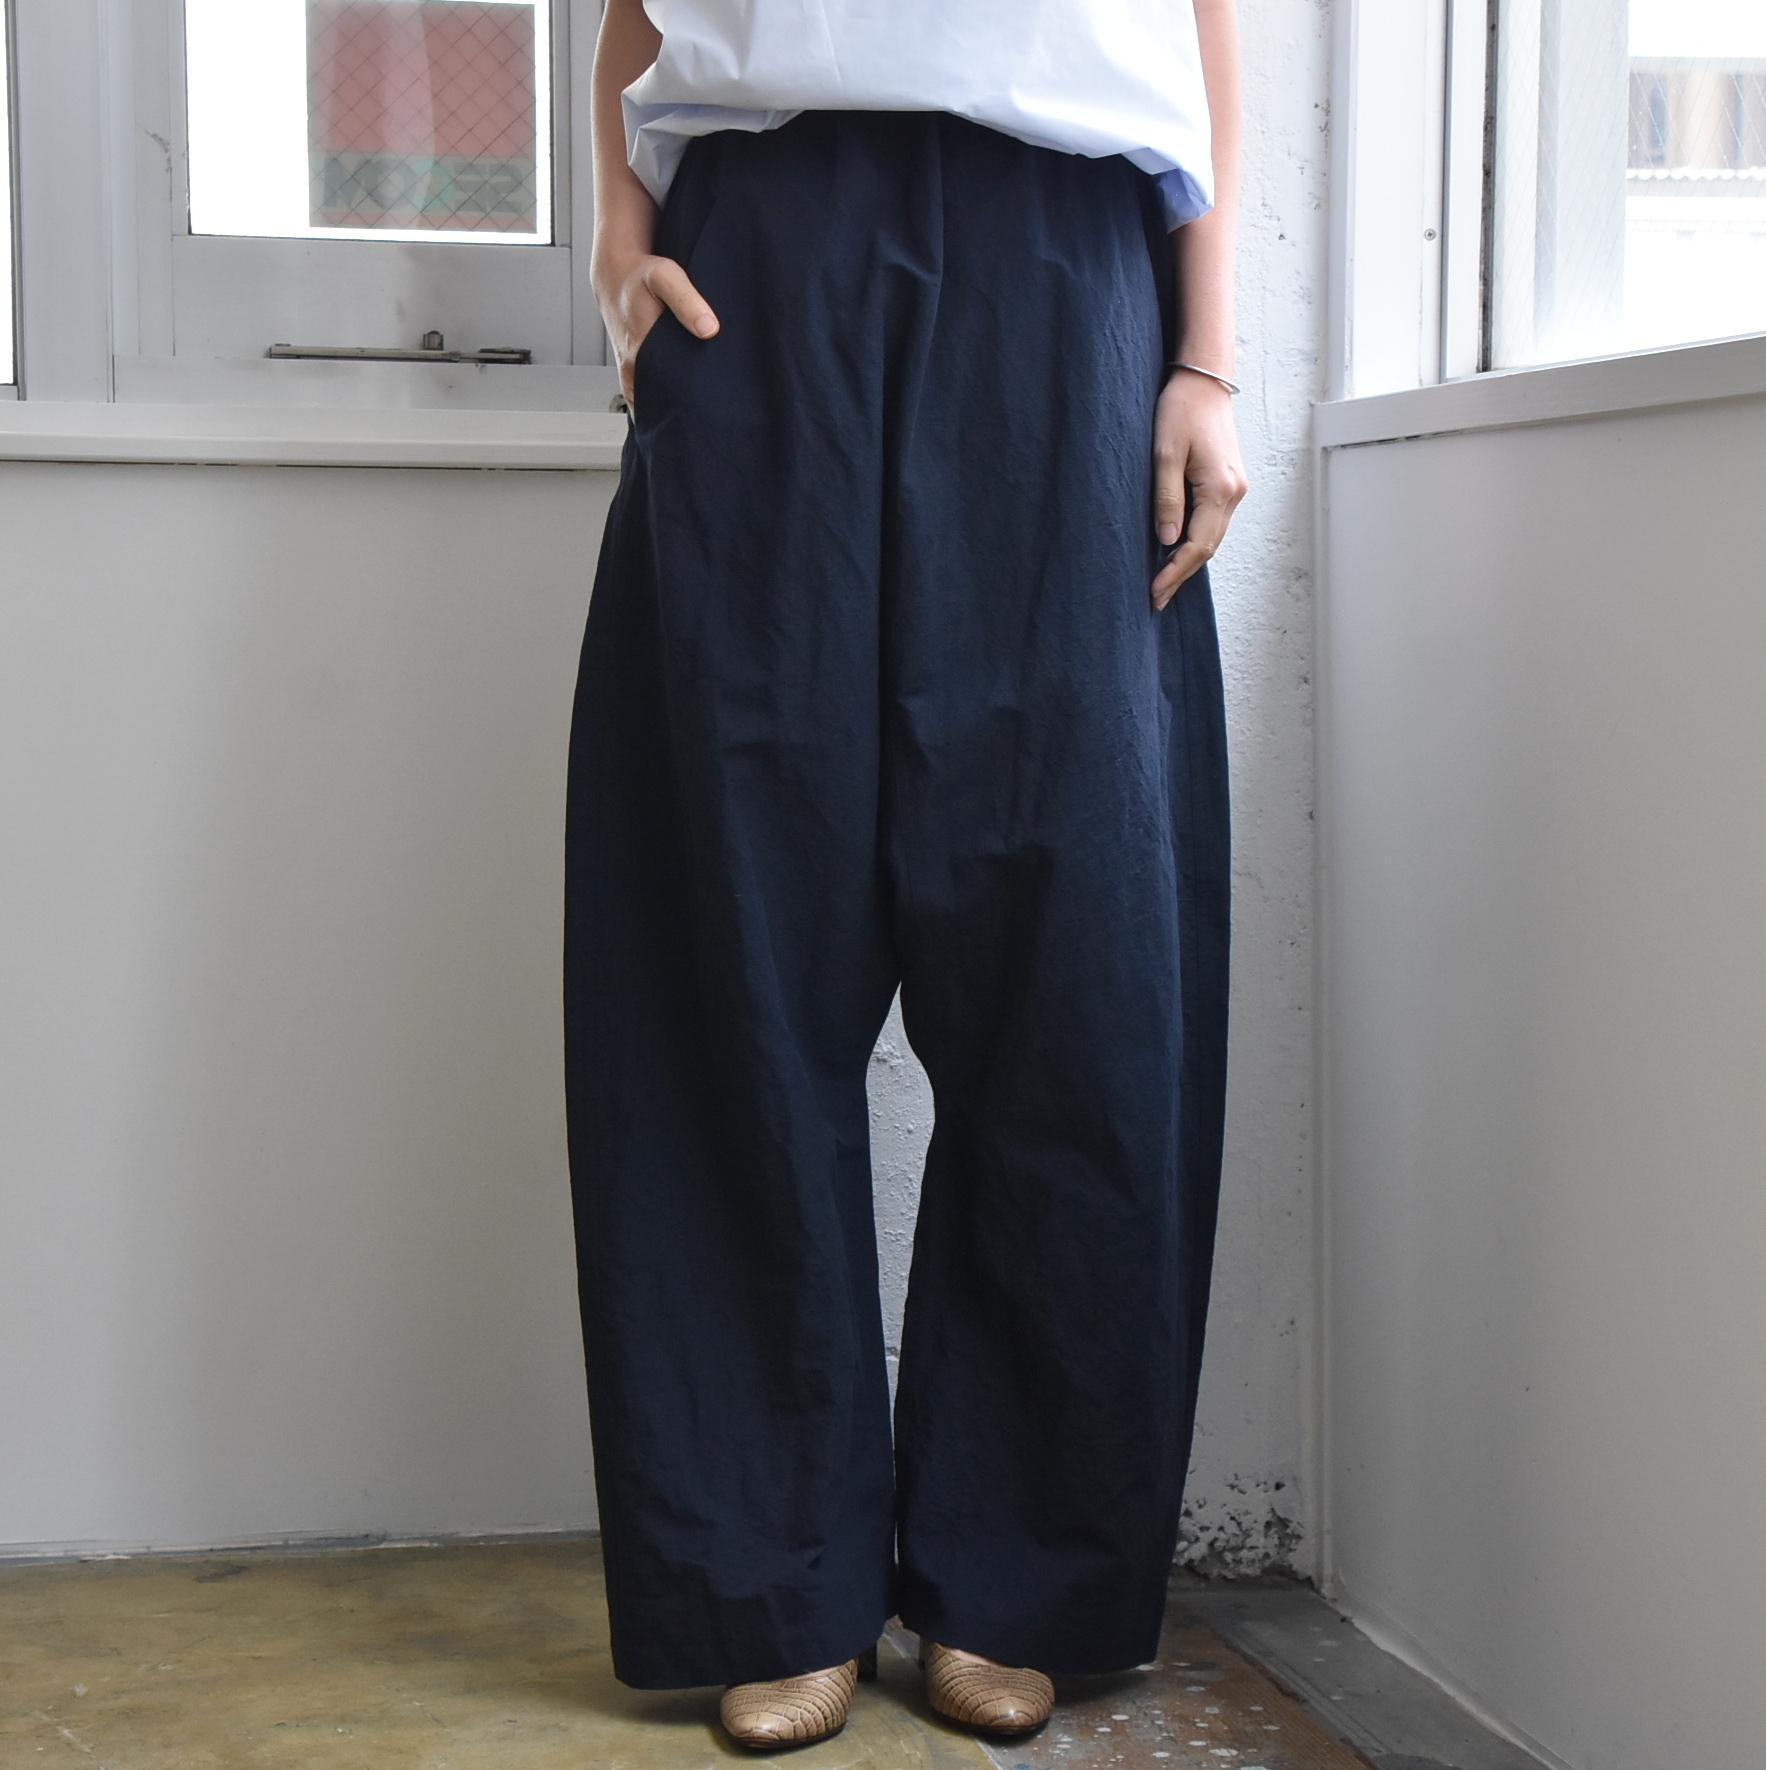 SOFIE D'HOORE(\tB[h[) / Relaxed extra low crotch pantsy2FWJz#PLOF-AA(4)